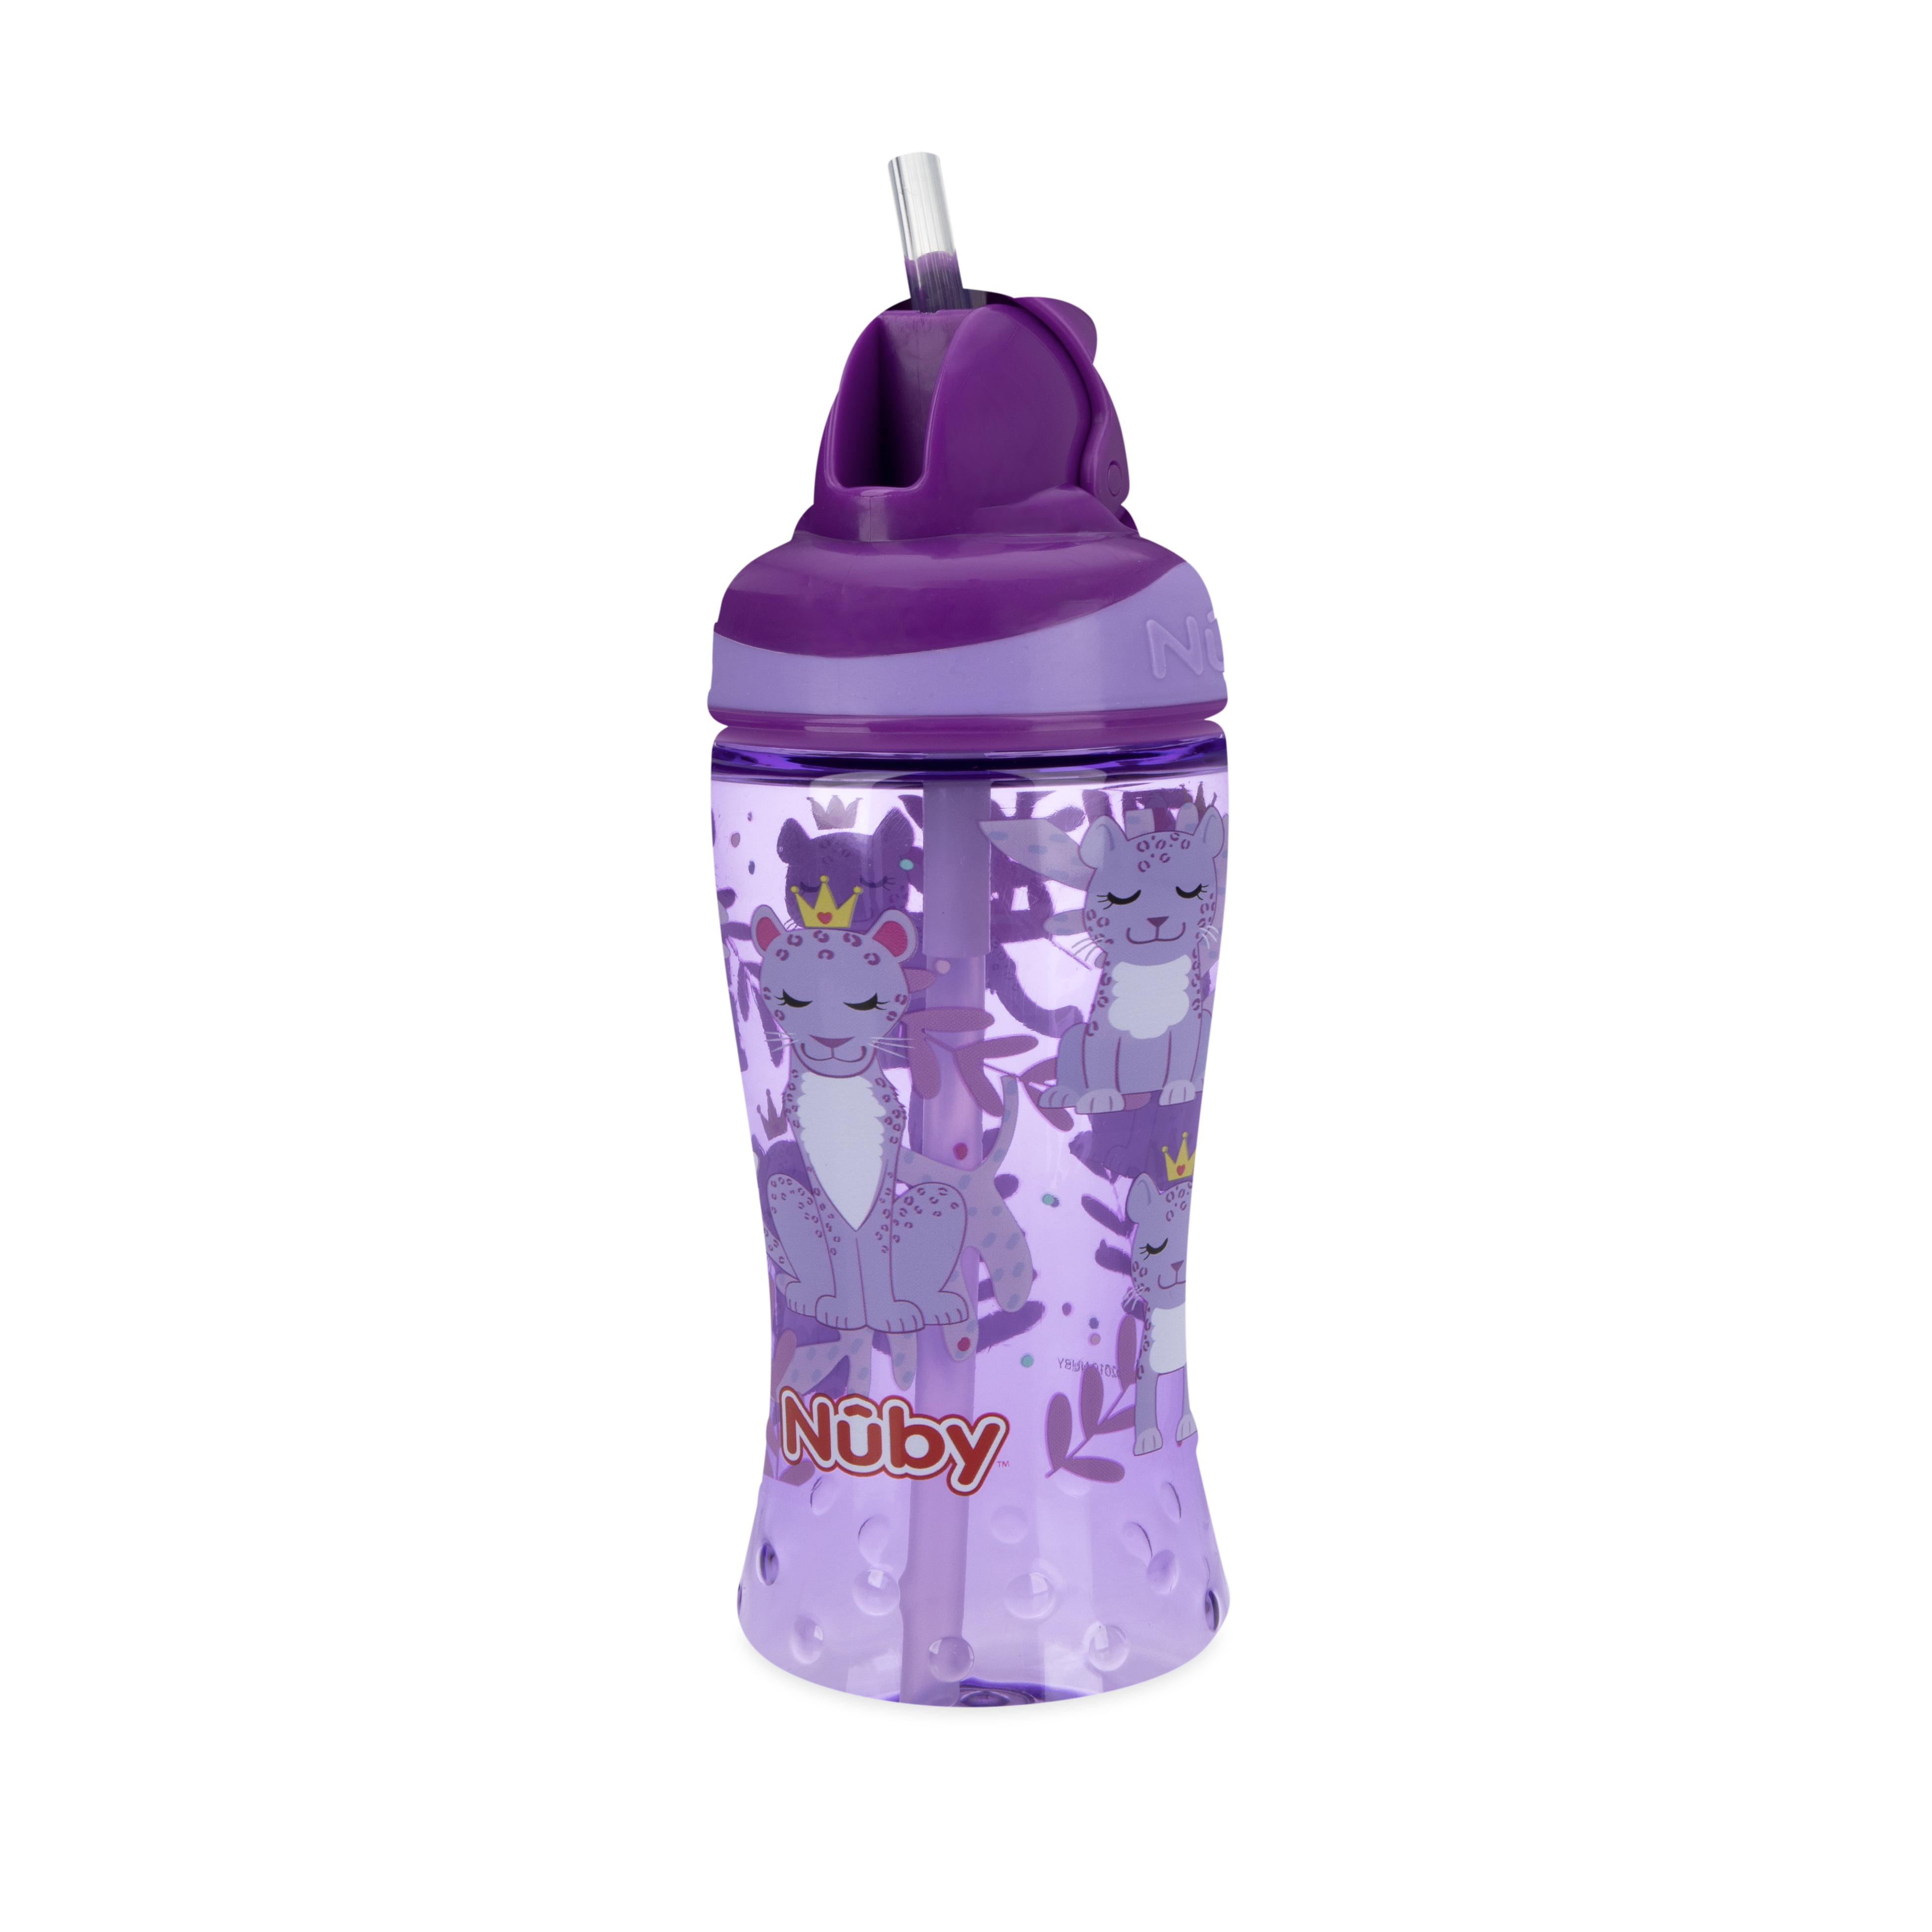 Nuby No-Spill Boost Cups with Flip-it Straw - 12 oz, 18+ Months